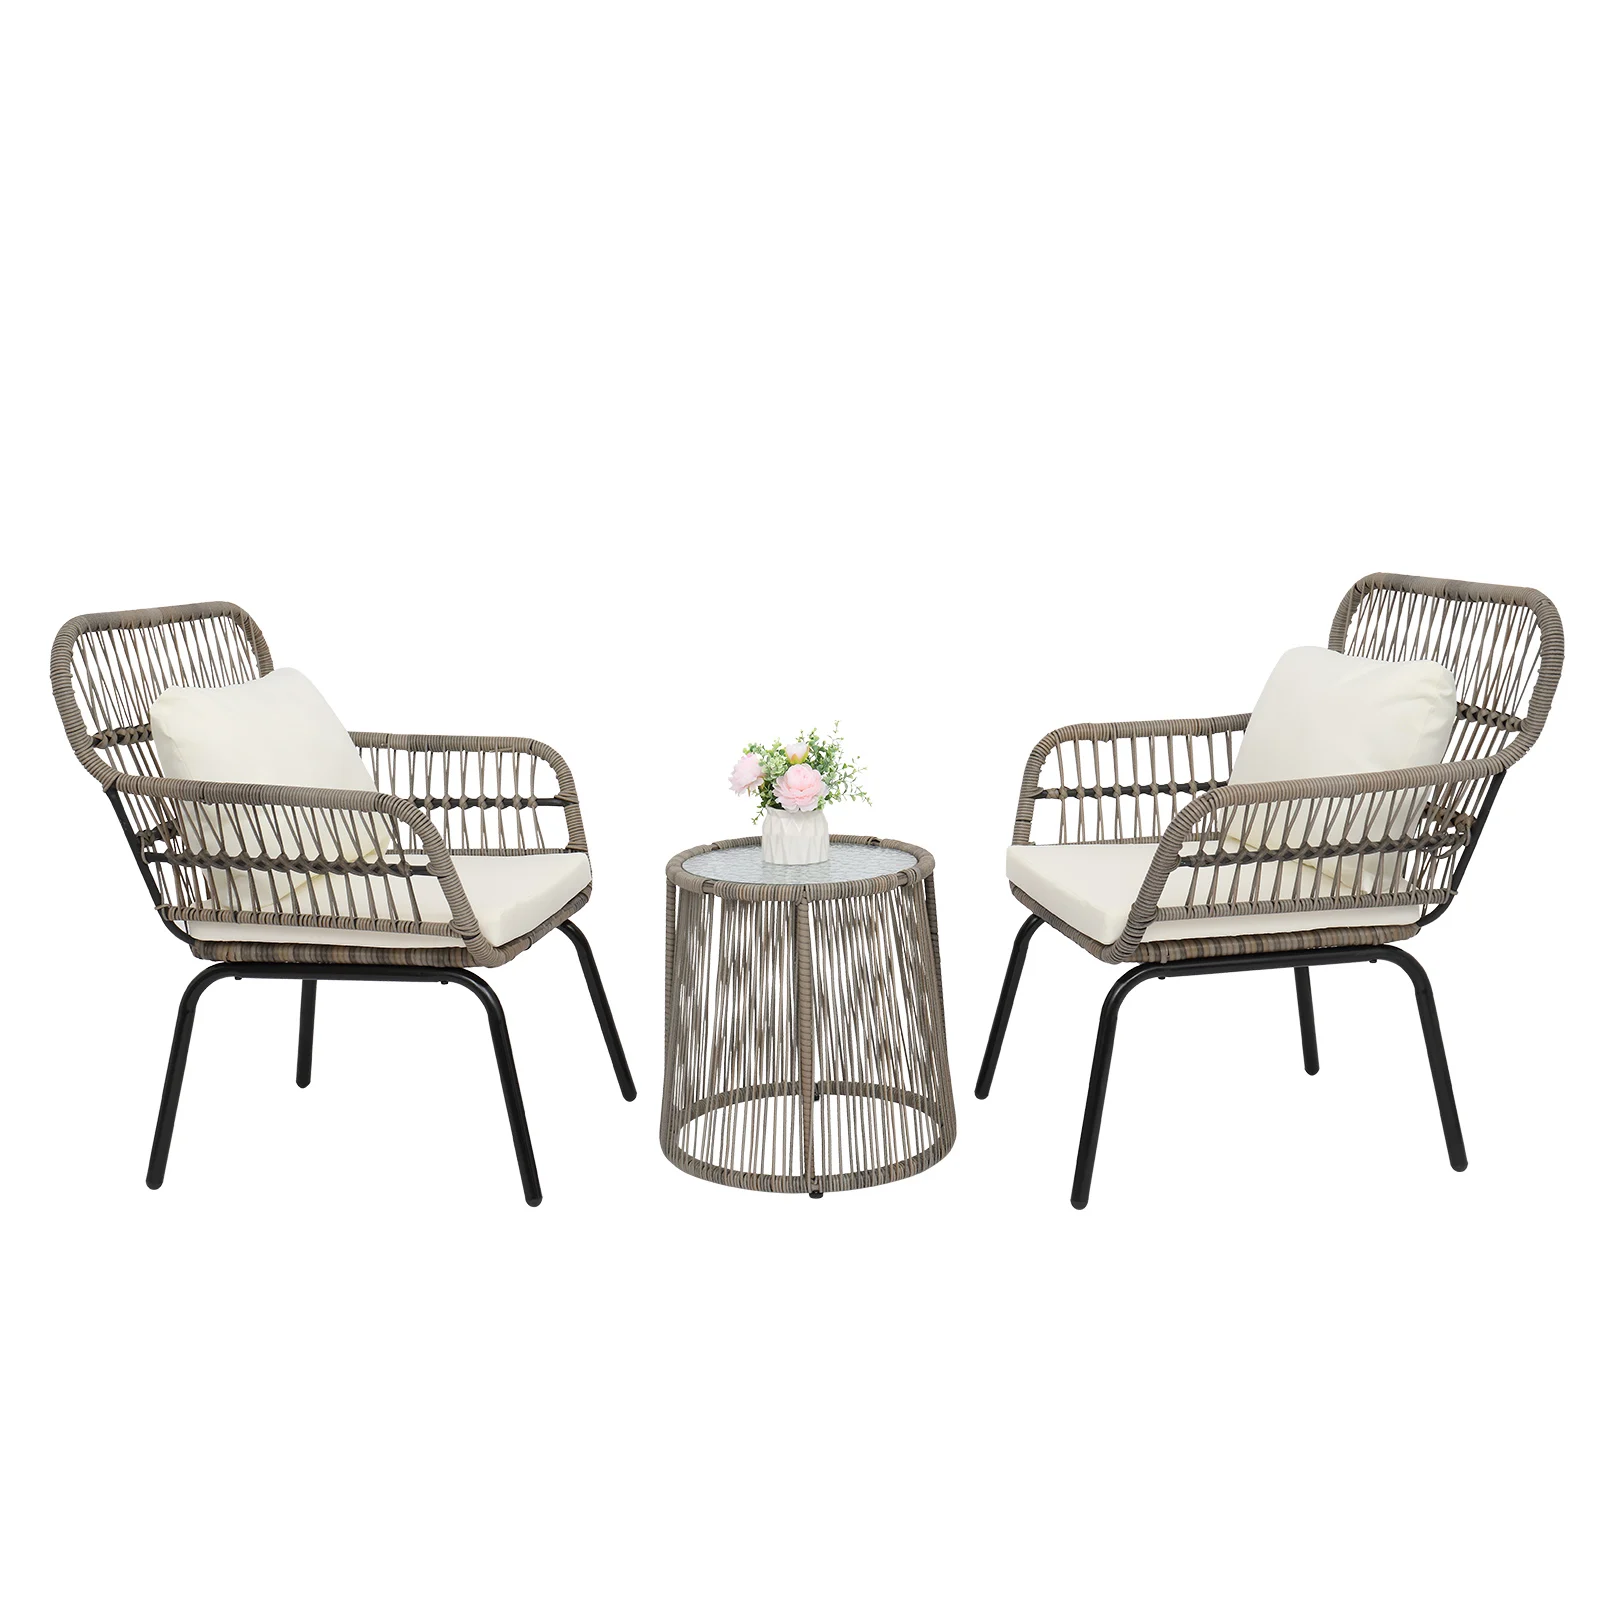 3-Piece Patio Wicker Conversation Bistro Set Steel Frame with 2 Chairs&Tempered Glass Top Side Table&Cushions Tan/Gray[US-Stock]